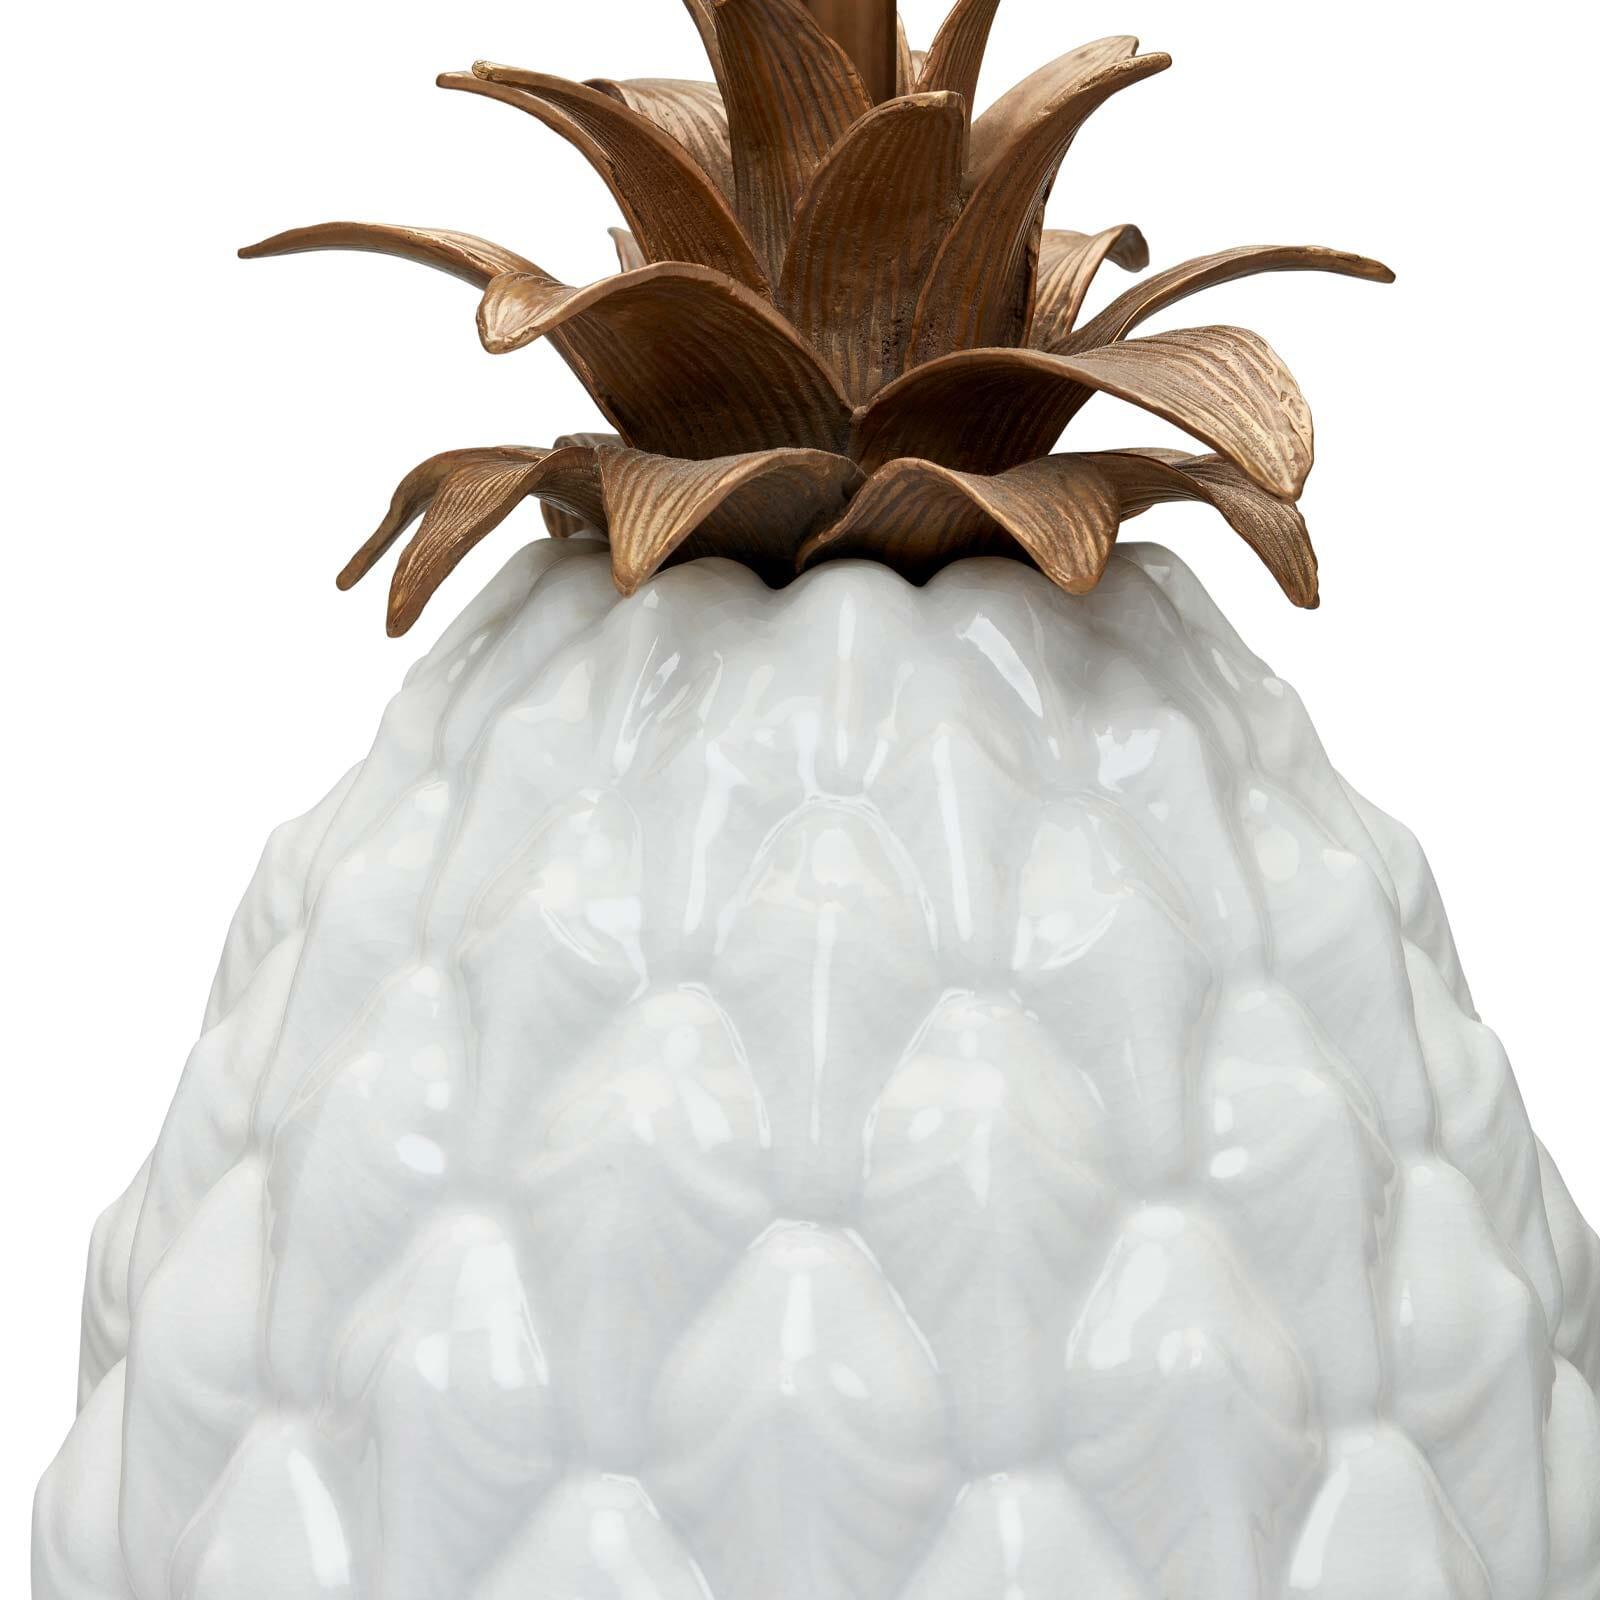 Crafted from off-white porcelain and brass, this ANANAS pineapple lamp-stand will complement any colour scheme. Sure to bring understated glamour to your home, it works with any one of House of Hackney's exquisitely printed shades. 

Please note